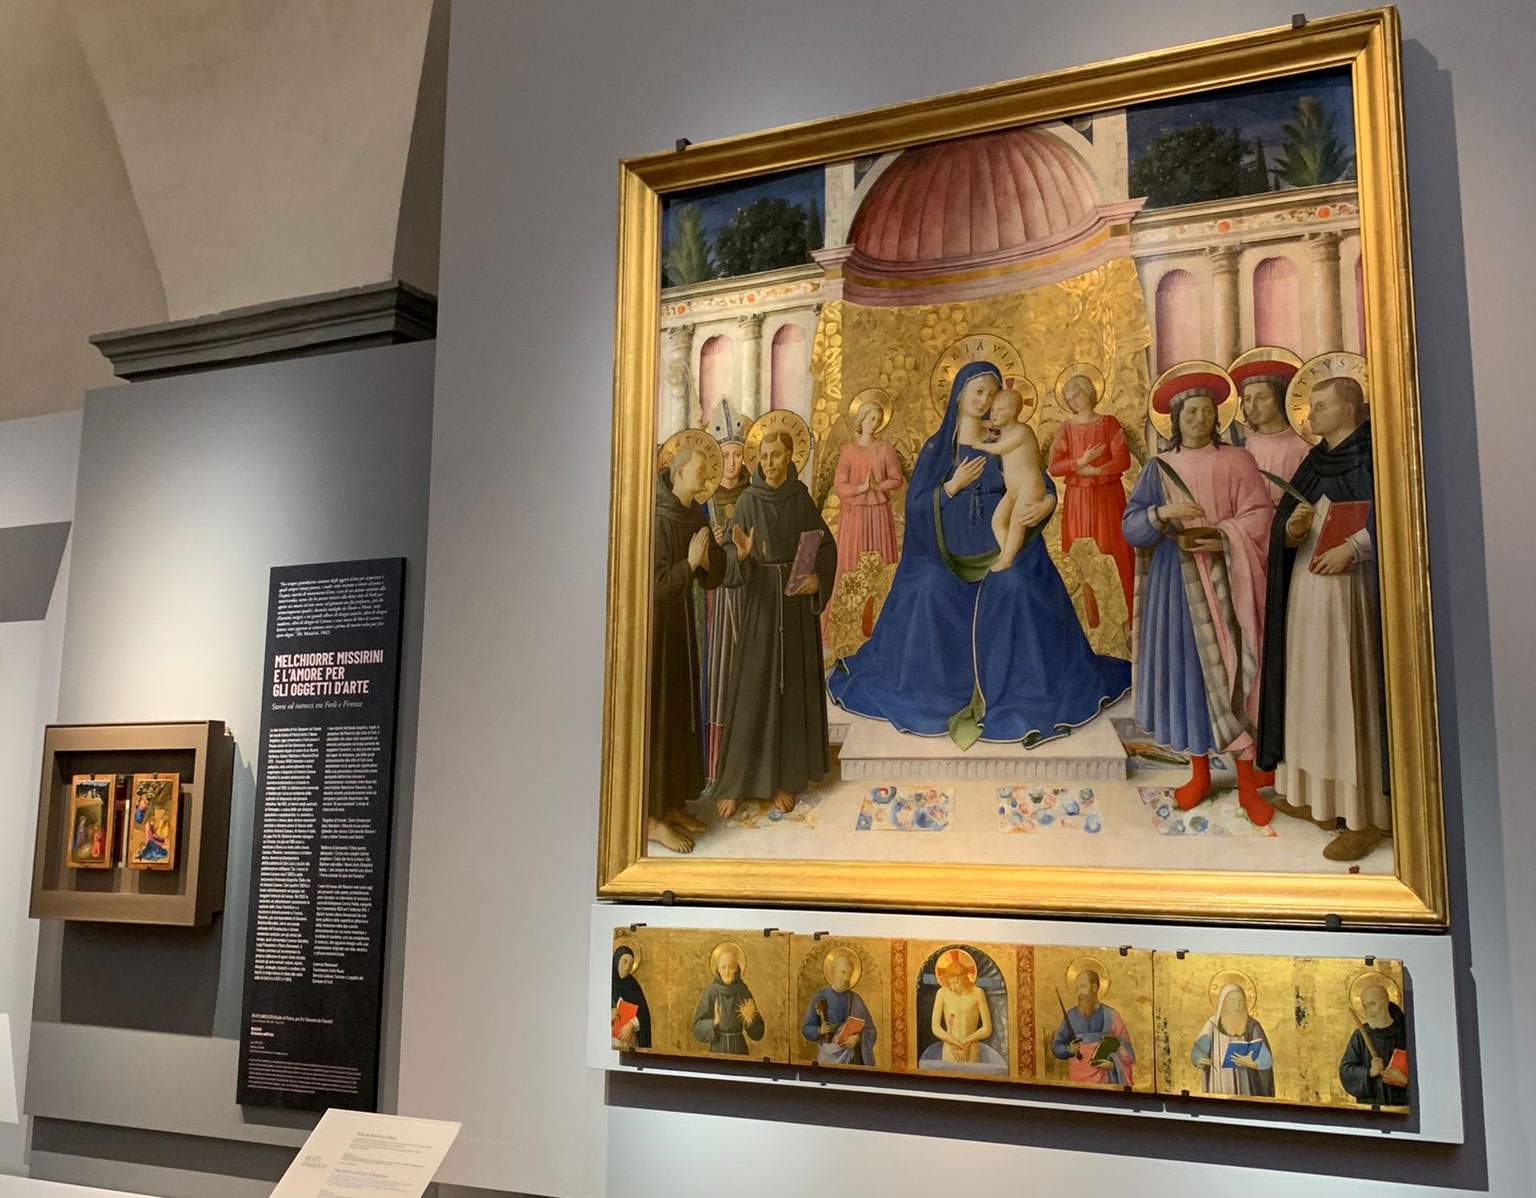 Restoration of the Bosco ai frati altarpiece, a masterpiece by Beato Angelico, ends